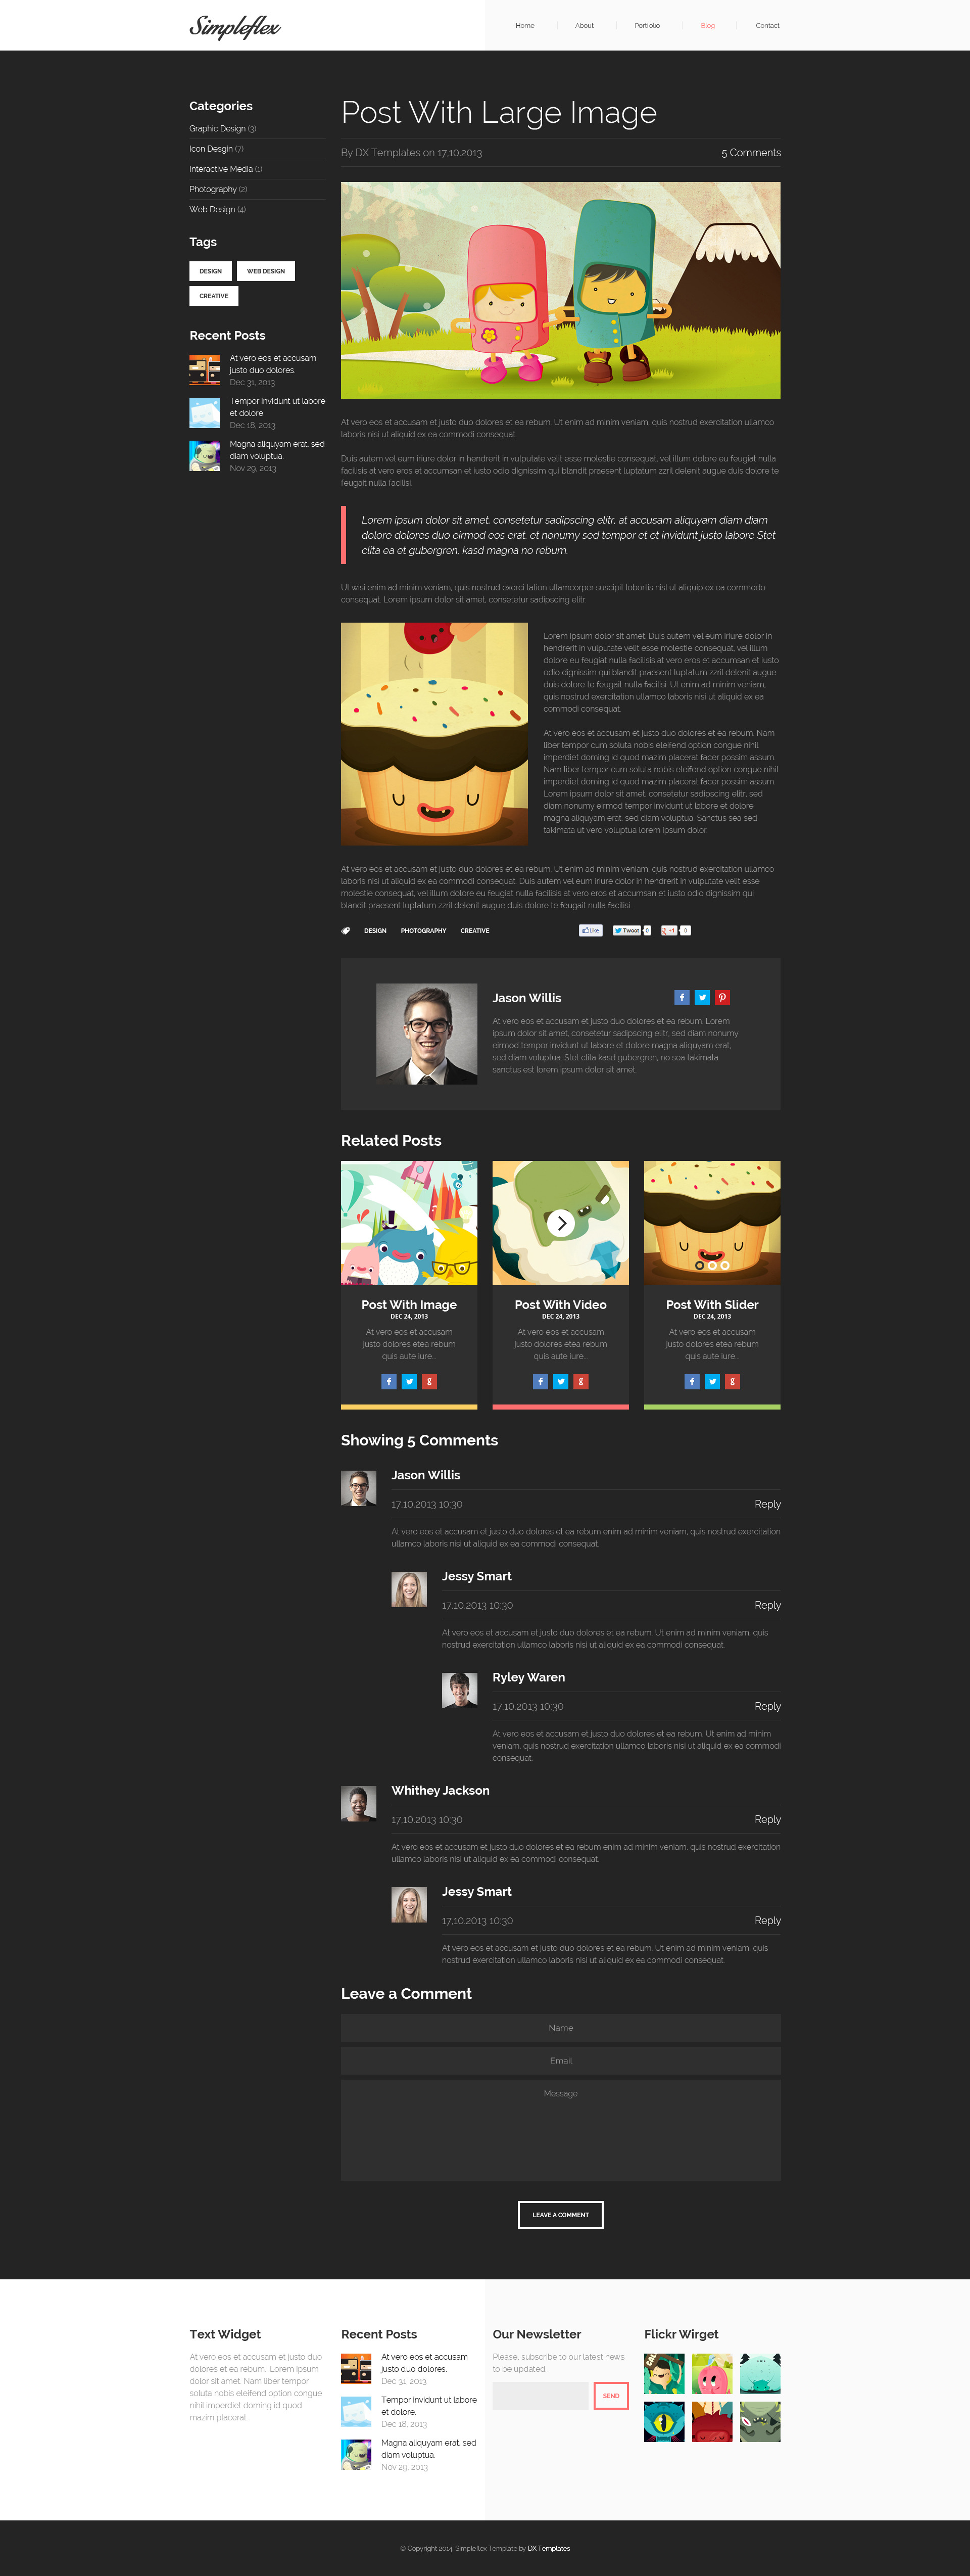 Simpleflex - OnePage & MultiPage Flat PSD template